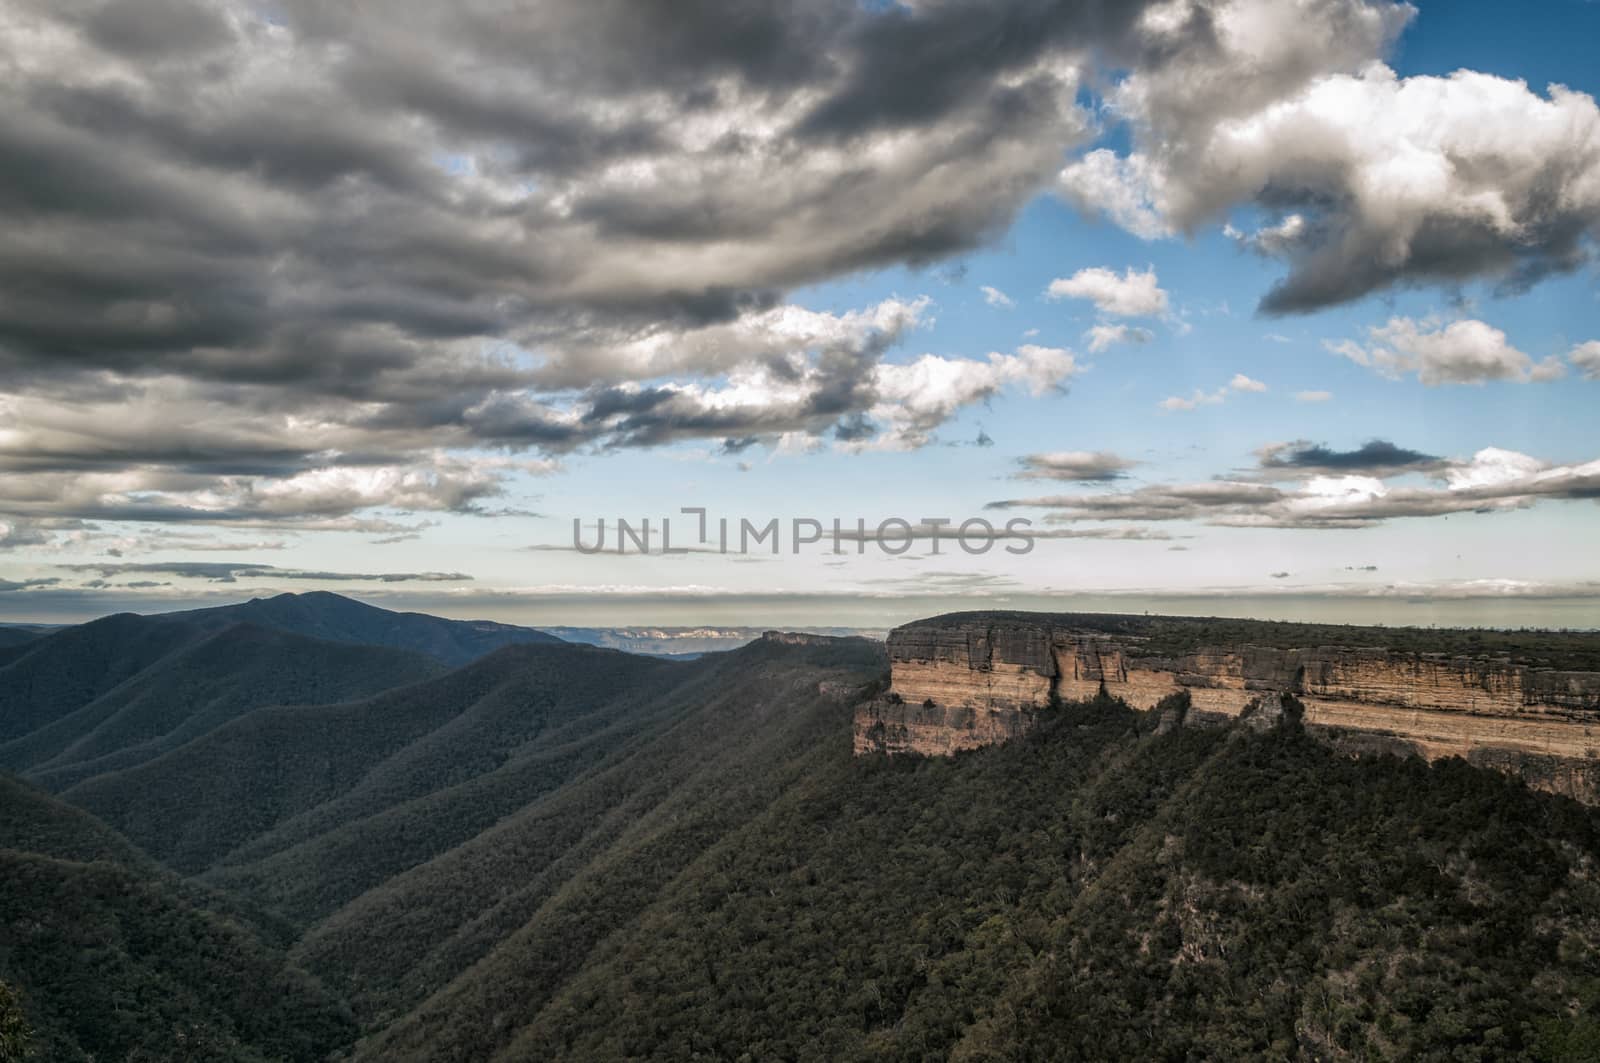 Landscape in the Blue Mountains, New Wales, Australia